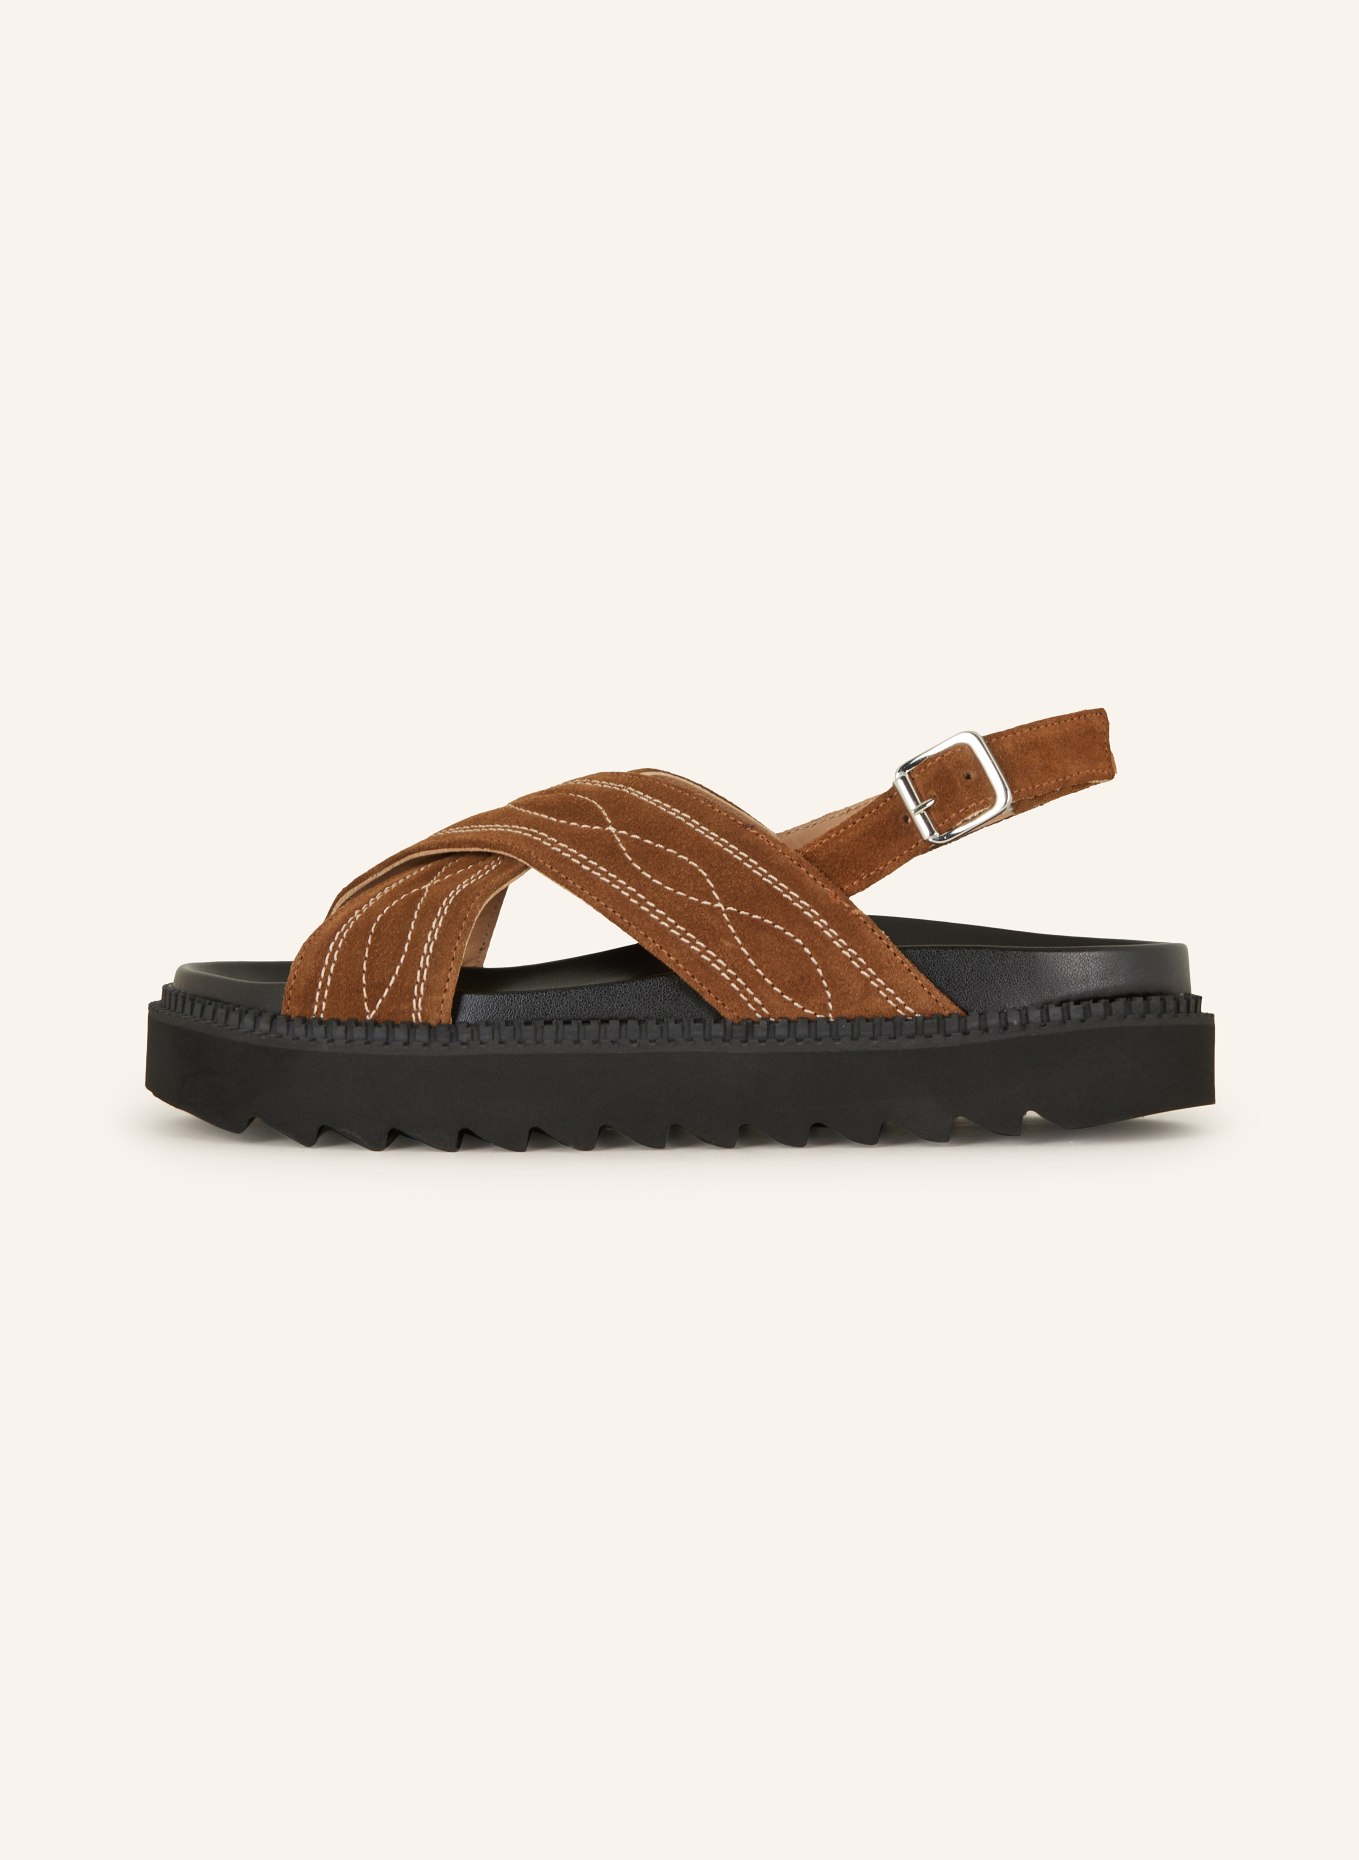 FREE LANCE Sandals TRINITY, Color: BROWN (Image 4)